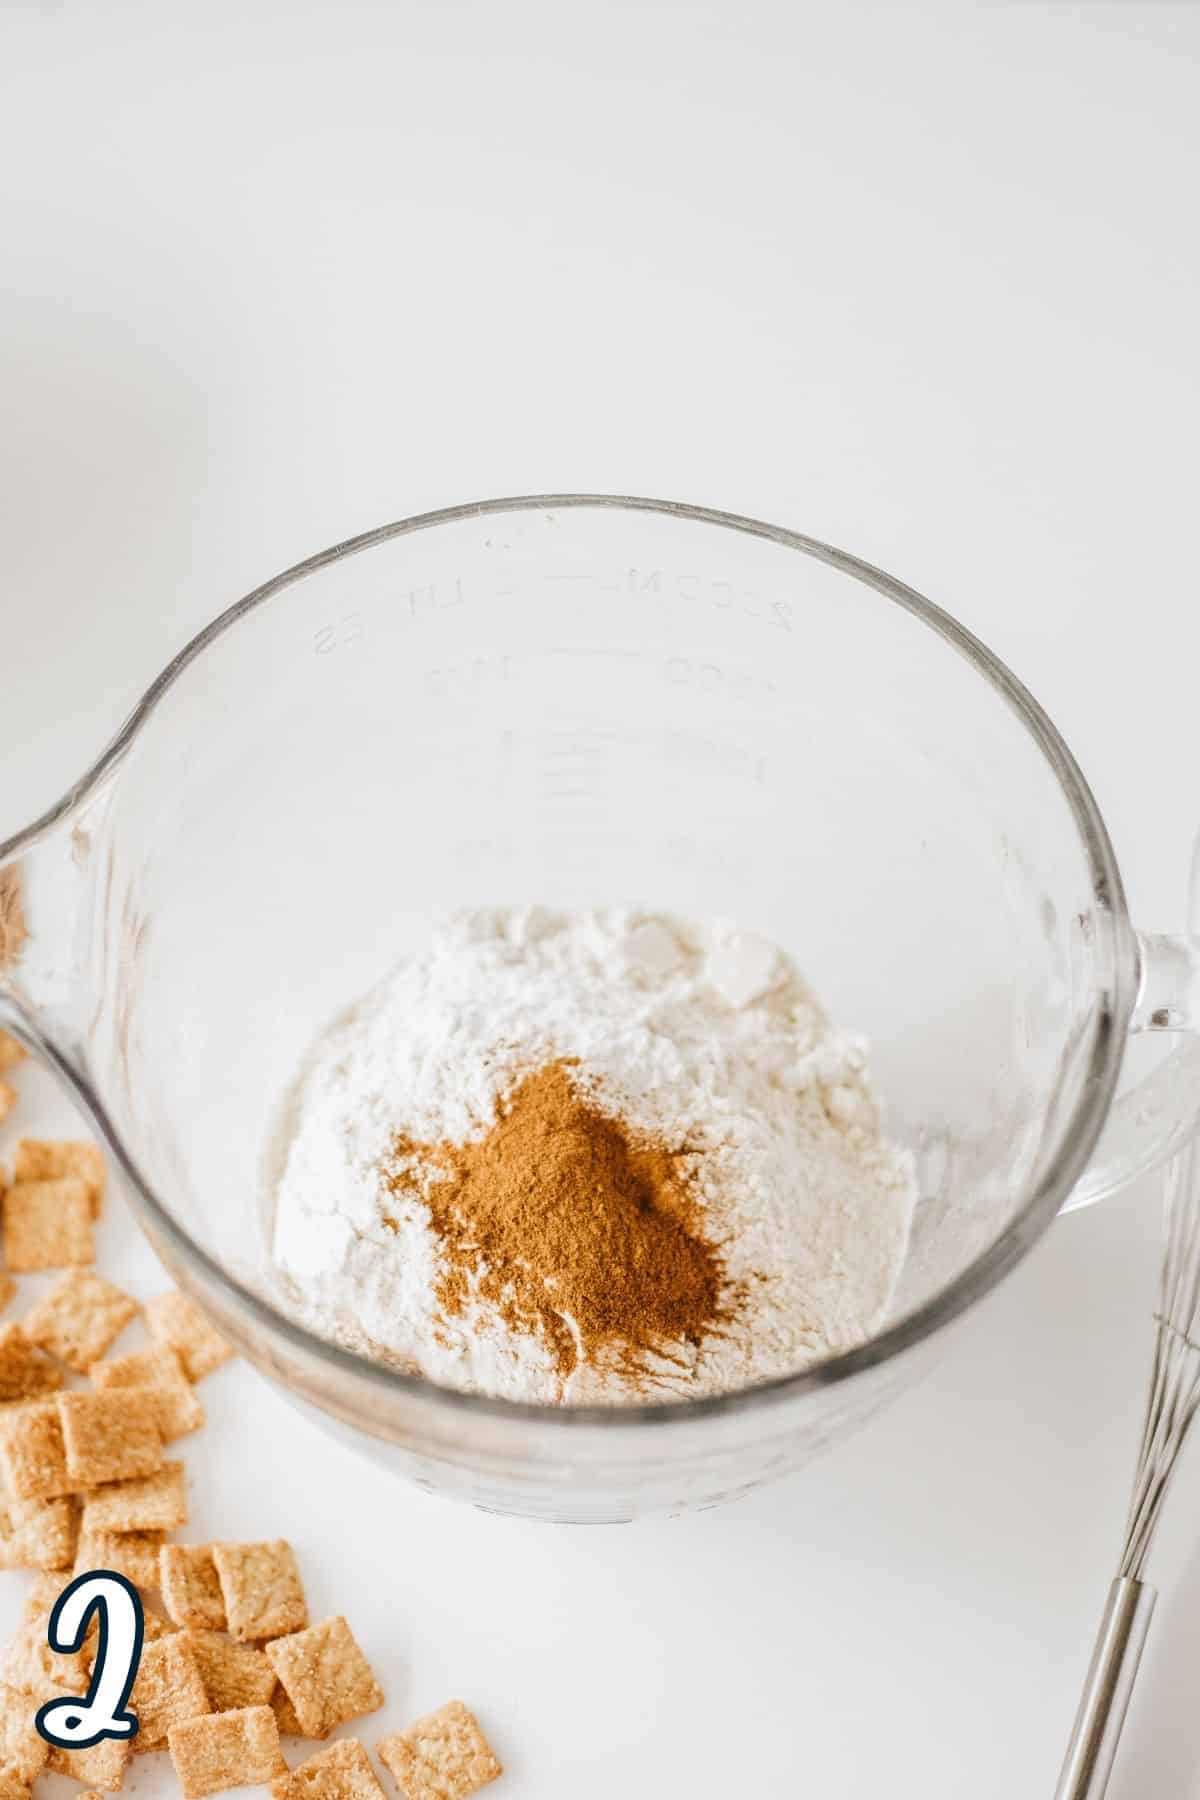 Flour, baking powder, baking soda, and cinnamon in a large glass mixing bowl. 